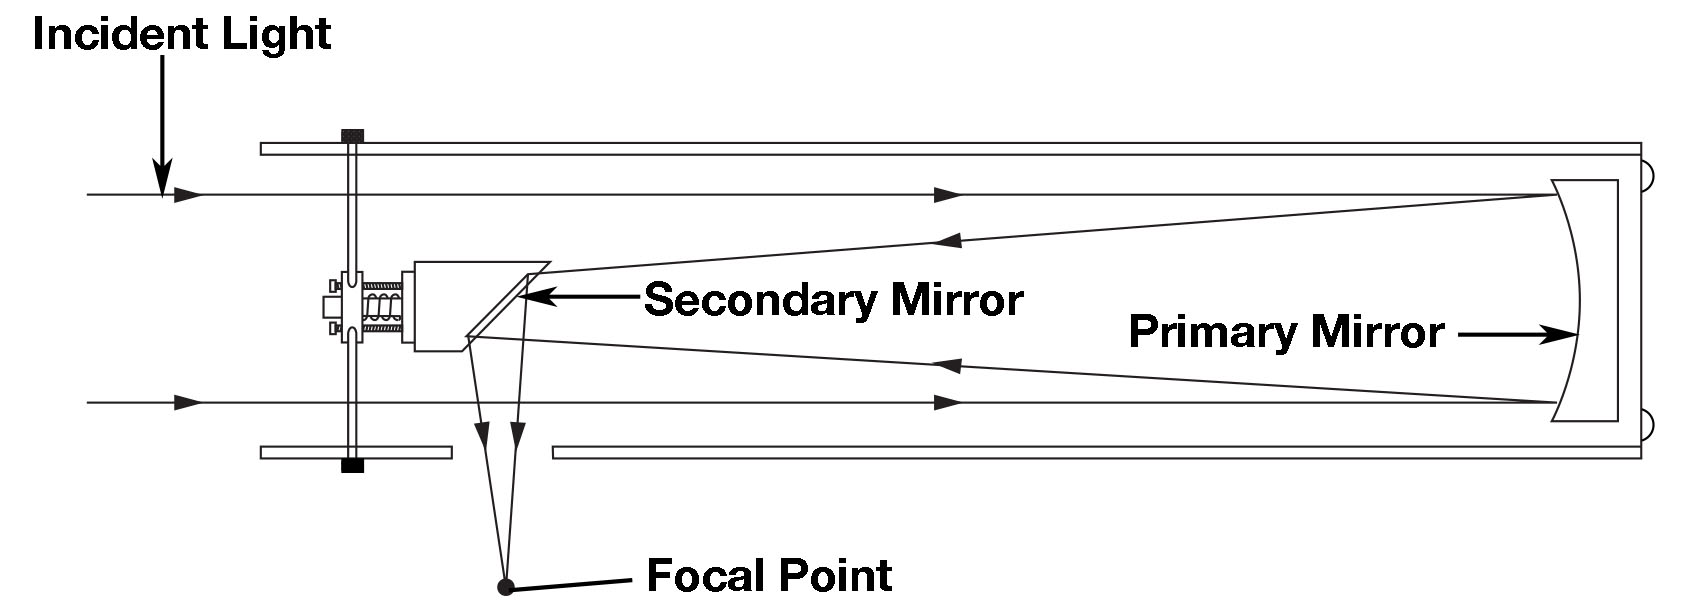 The optical path of the LX85 reflector telescope design